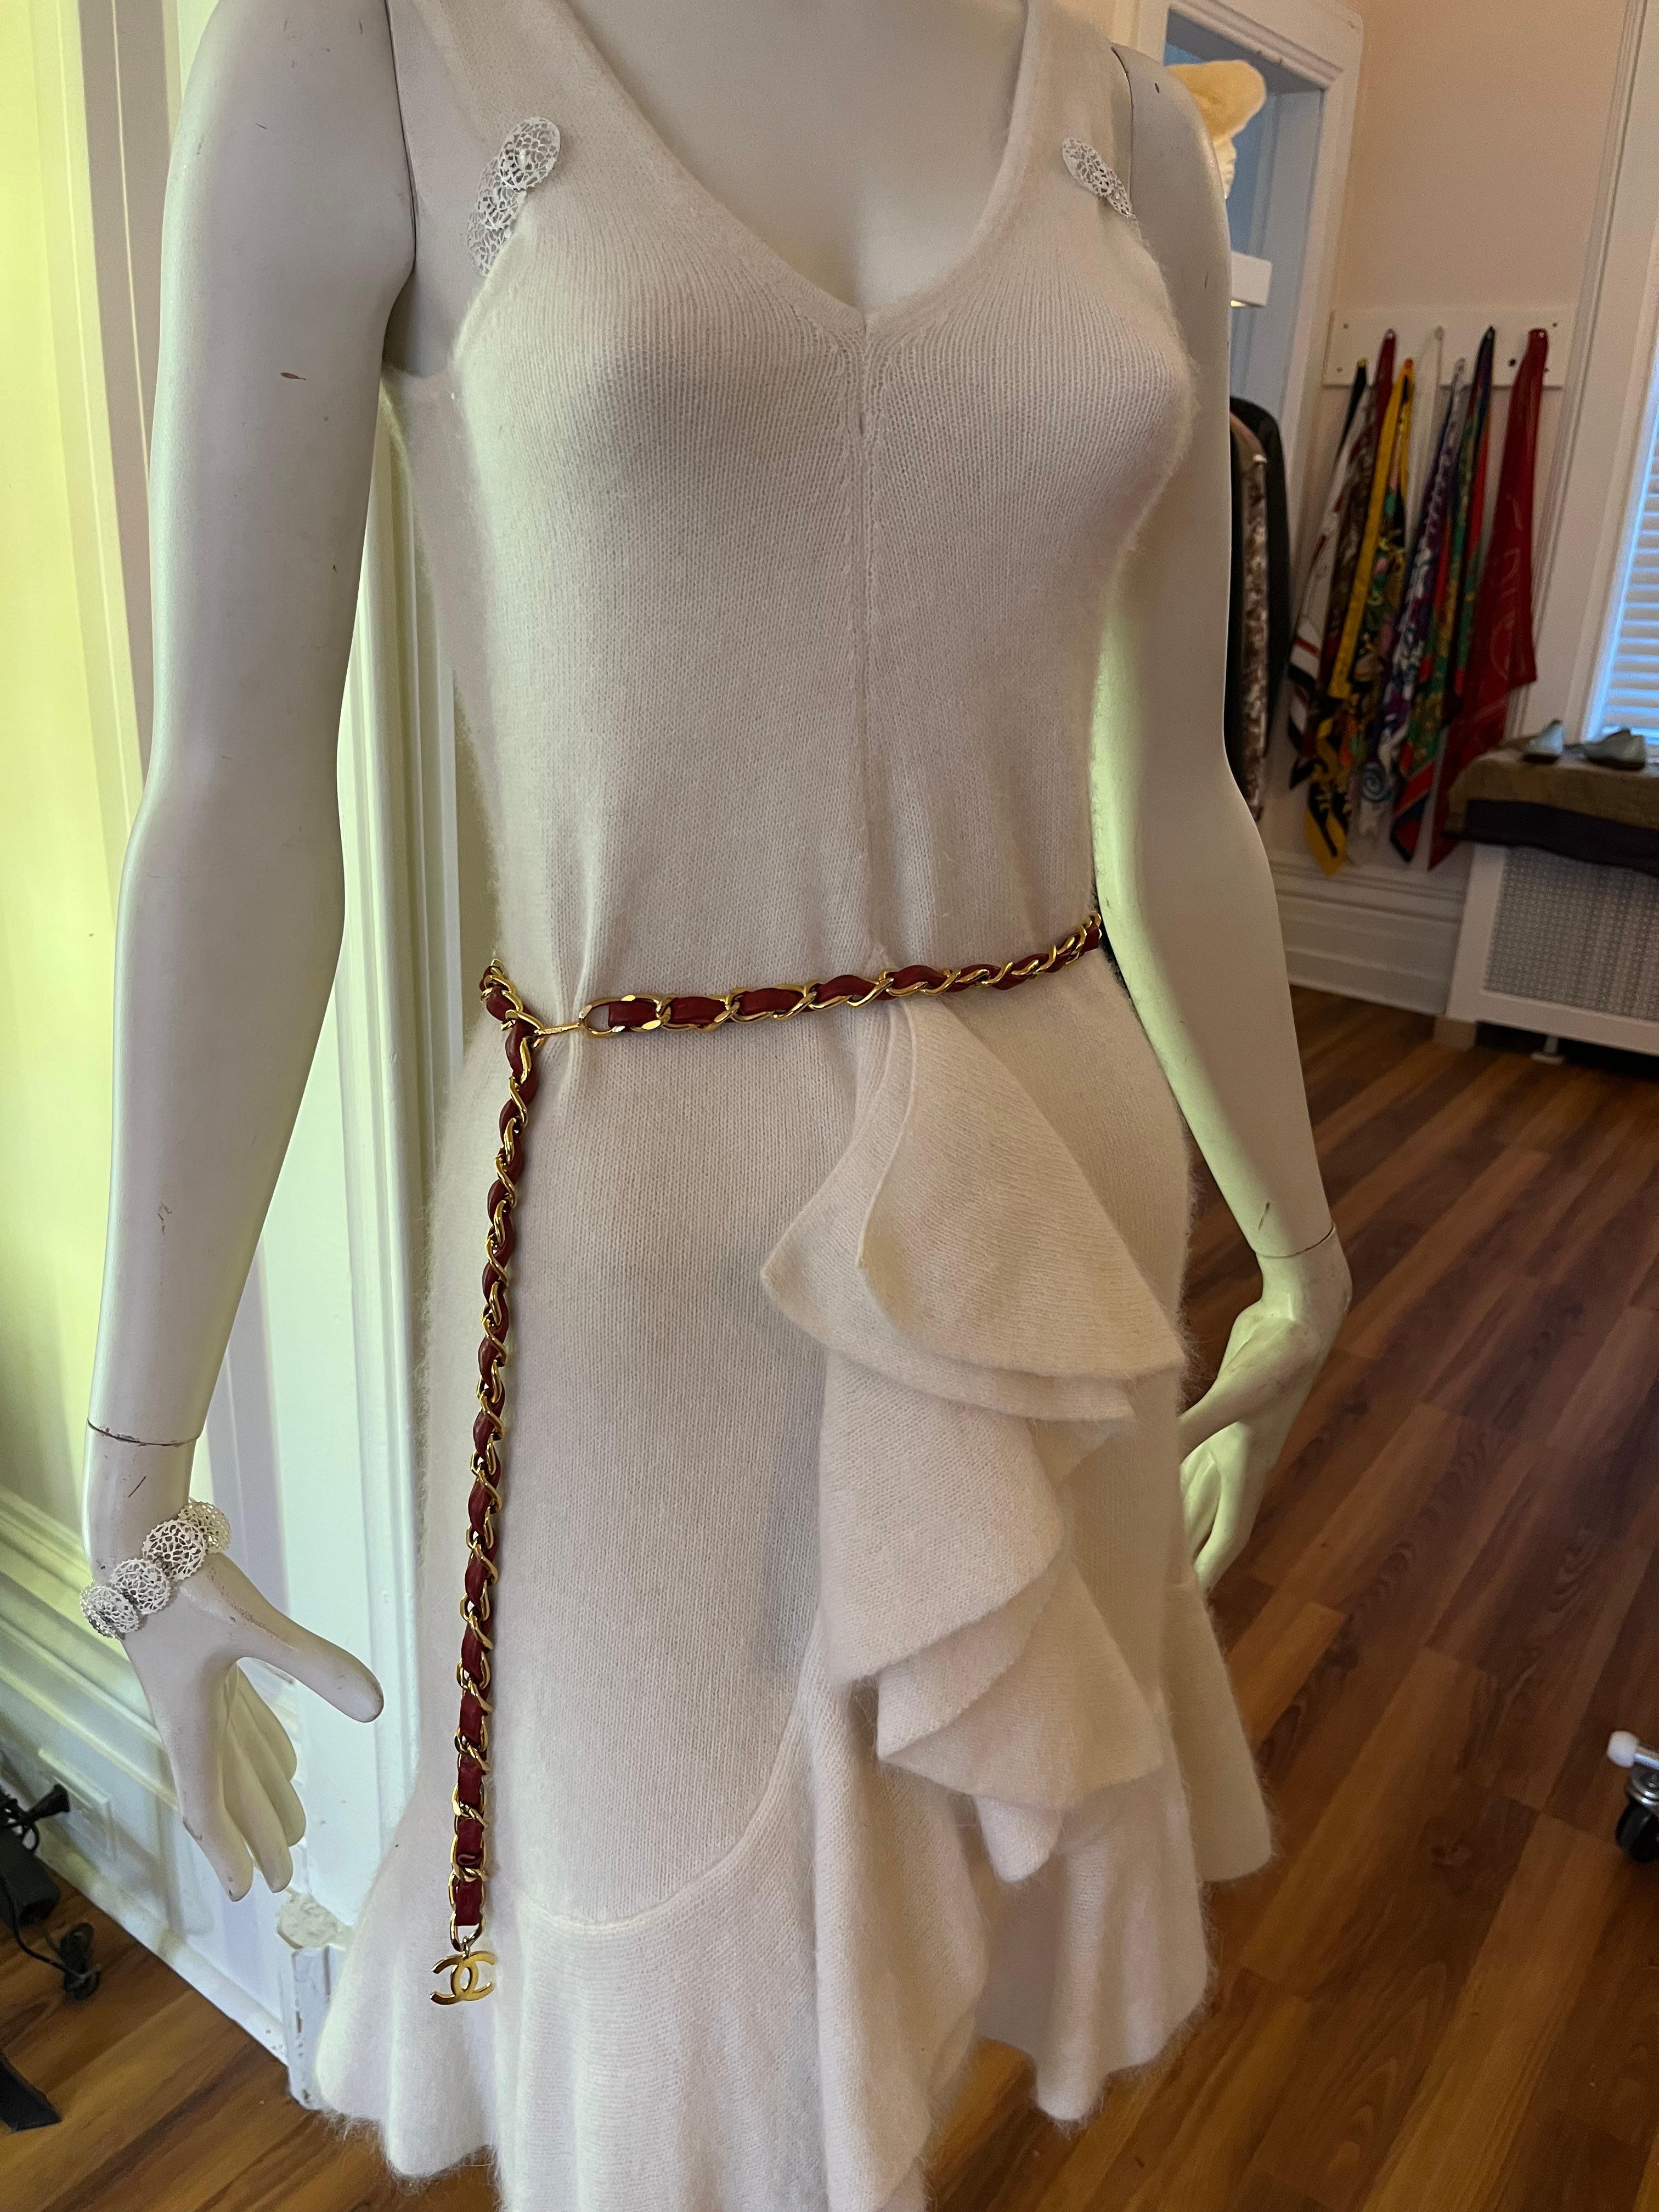 This gold-toned chain belt is interlaced with red leather and has a CC pendant and hook fastening. Chanel is stamped on the hook, and the length will fit up to a 36